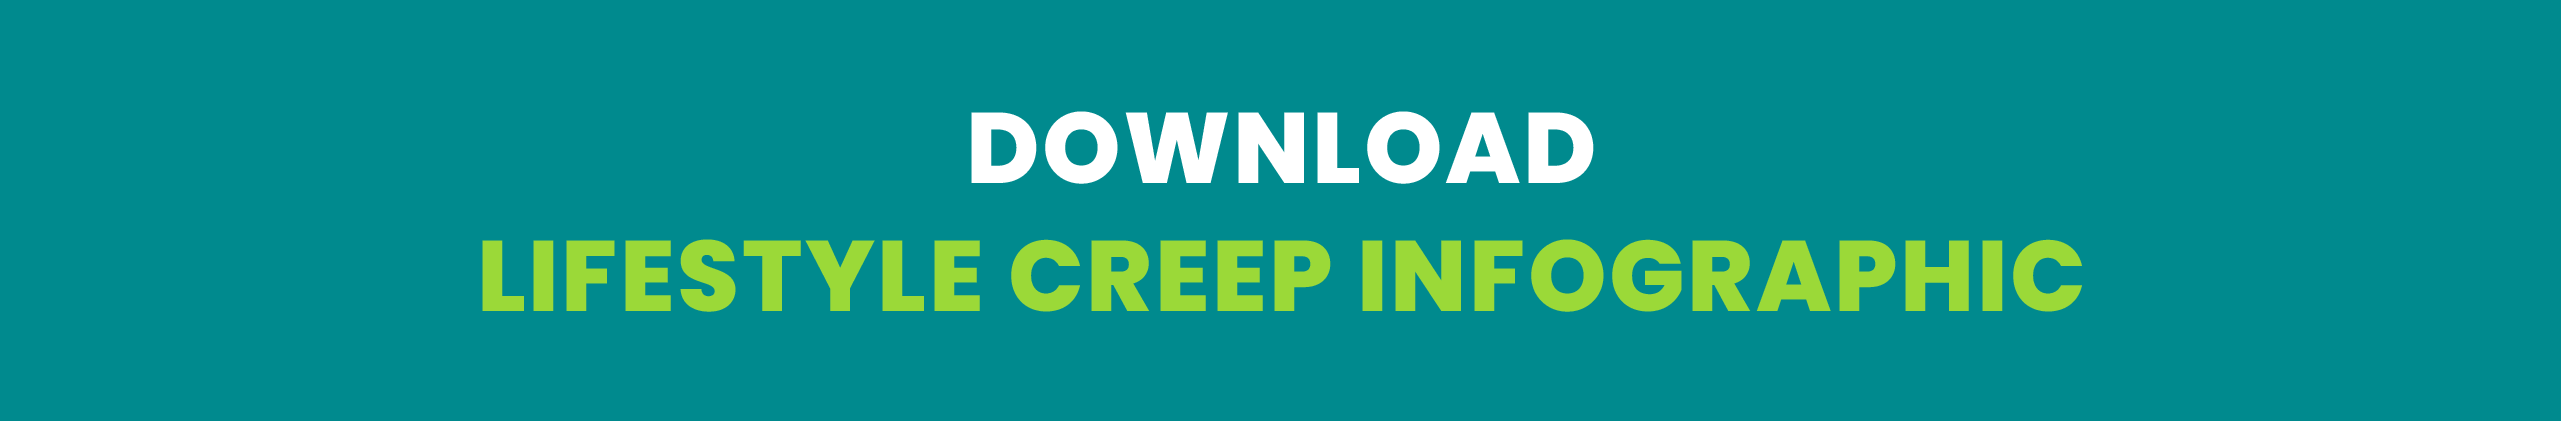 Download Lifestyle Creep Infographic button